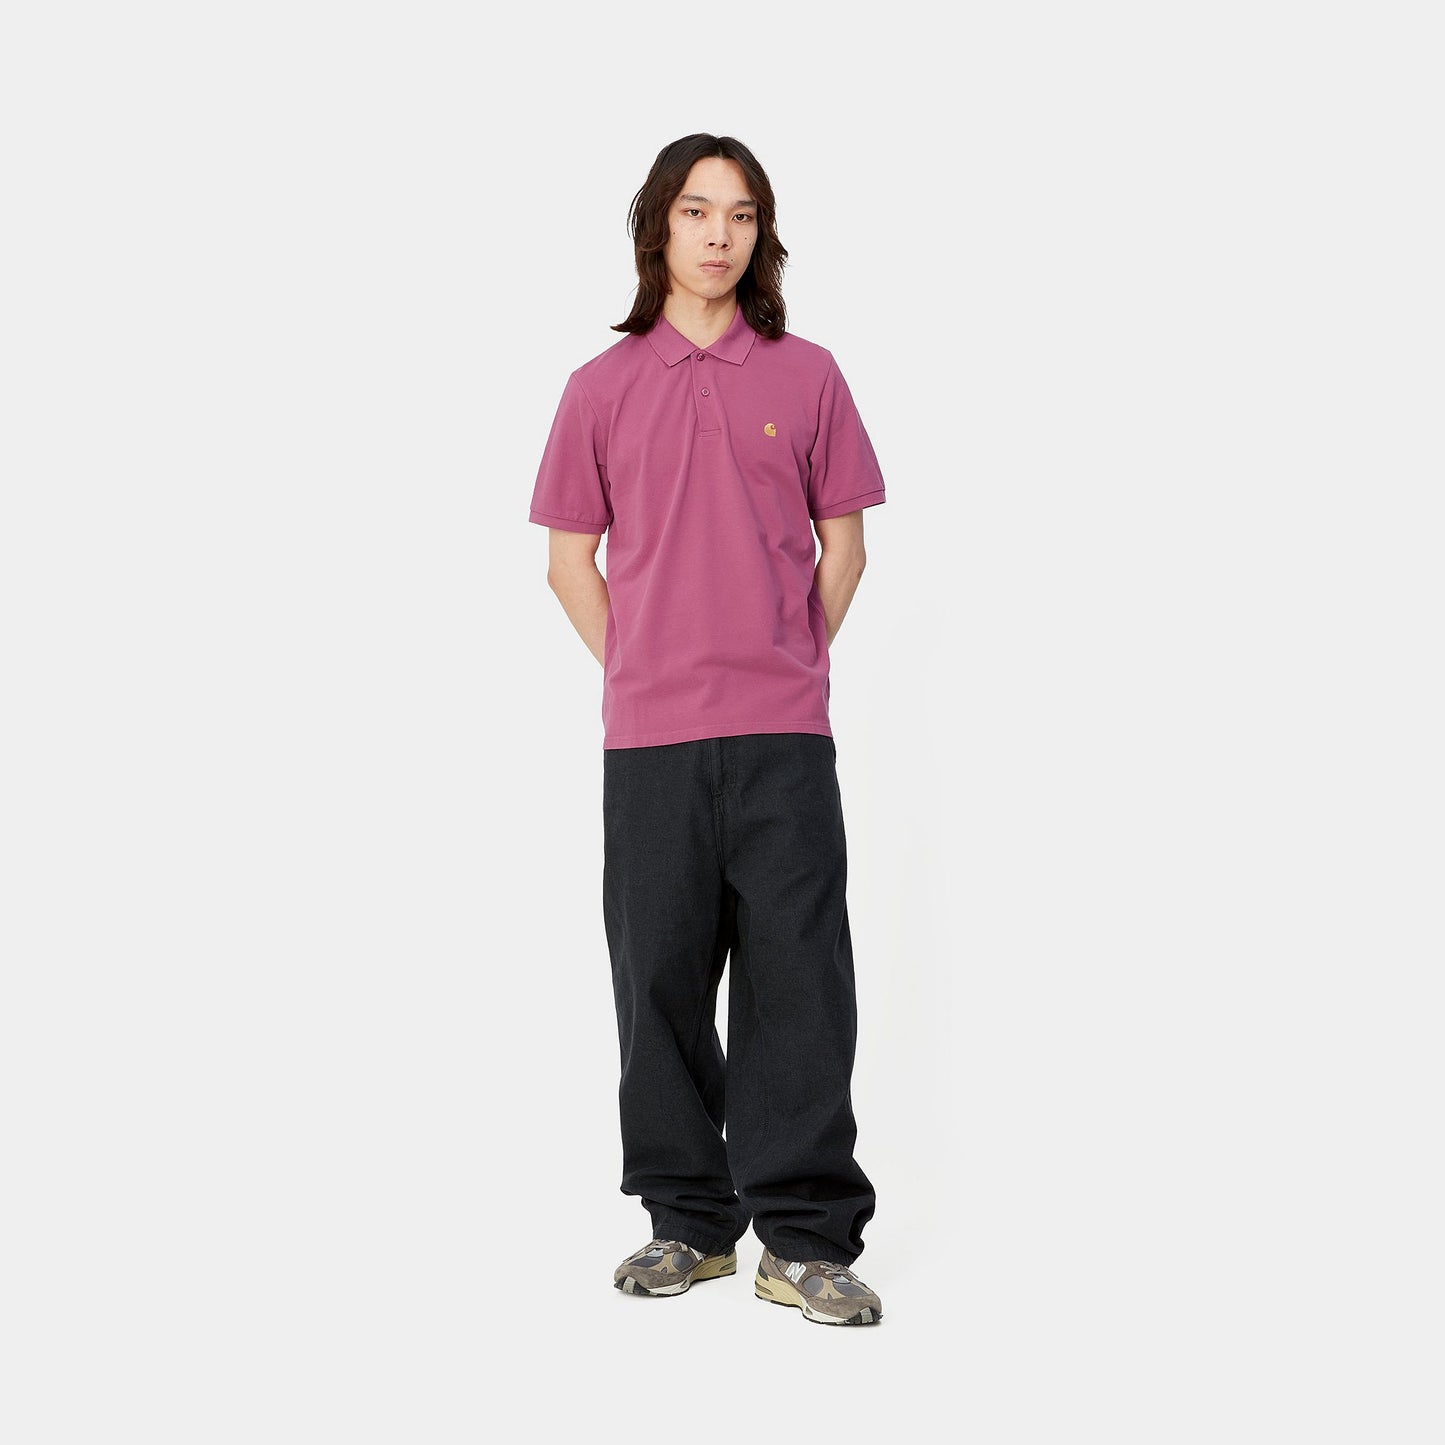 CARHARTT WIP S/S Chase Pique Polo - Magenta/Gold